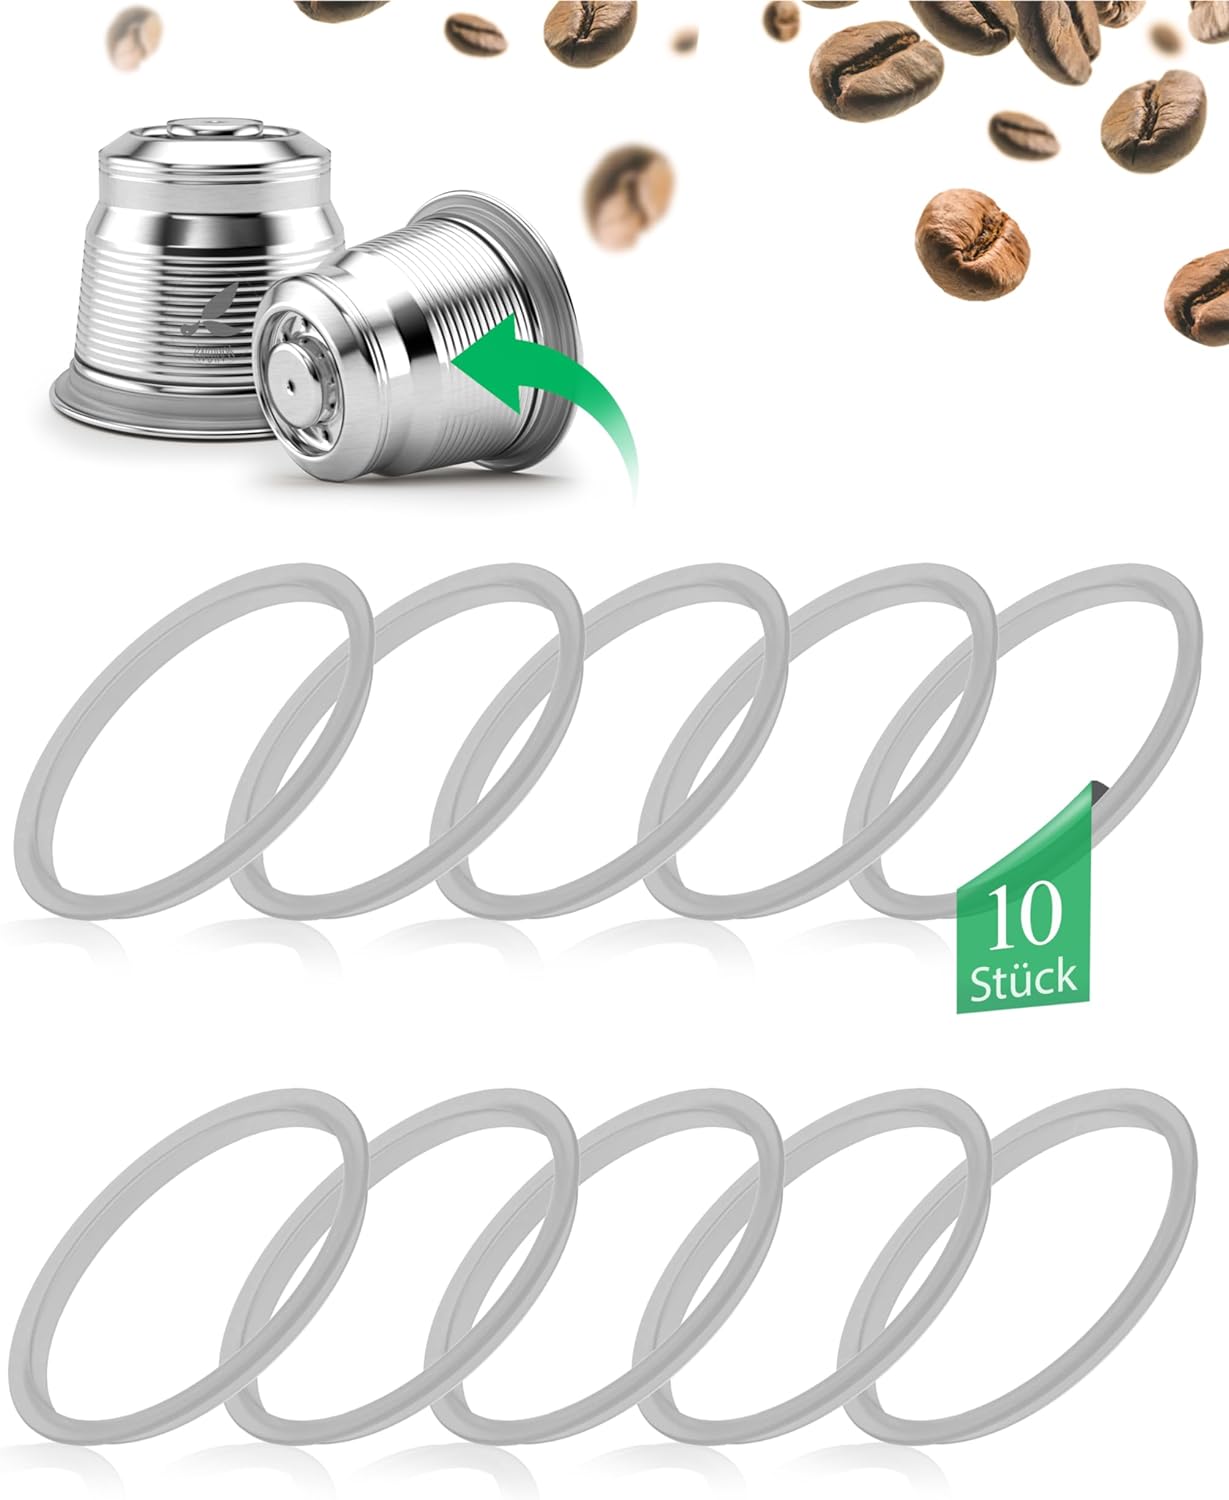 Pack of 10 Replacement Sealing Rings for Refillable mahona Coffee Capsules